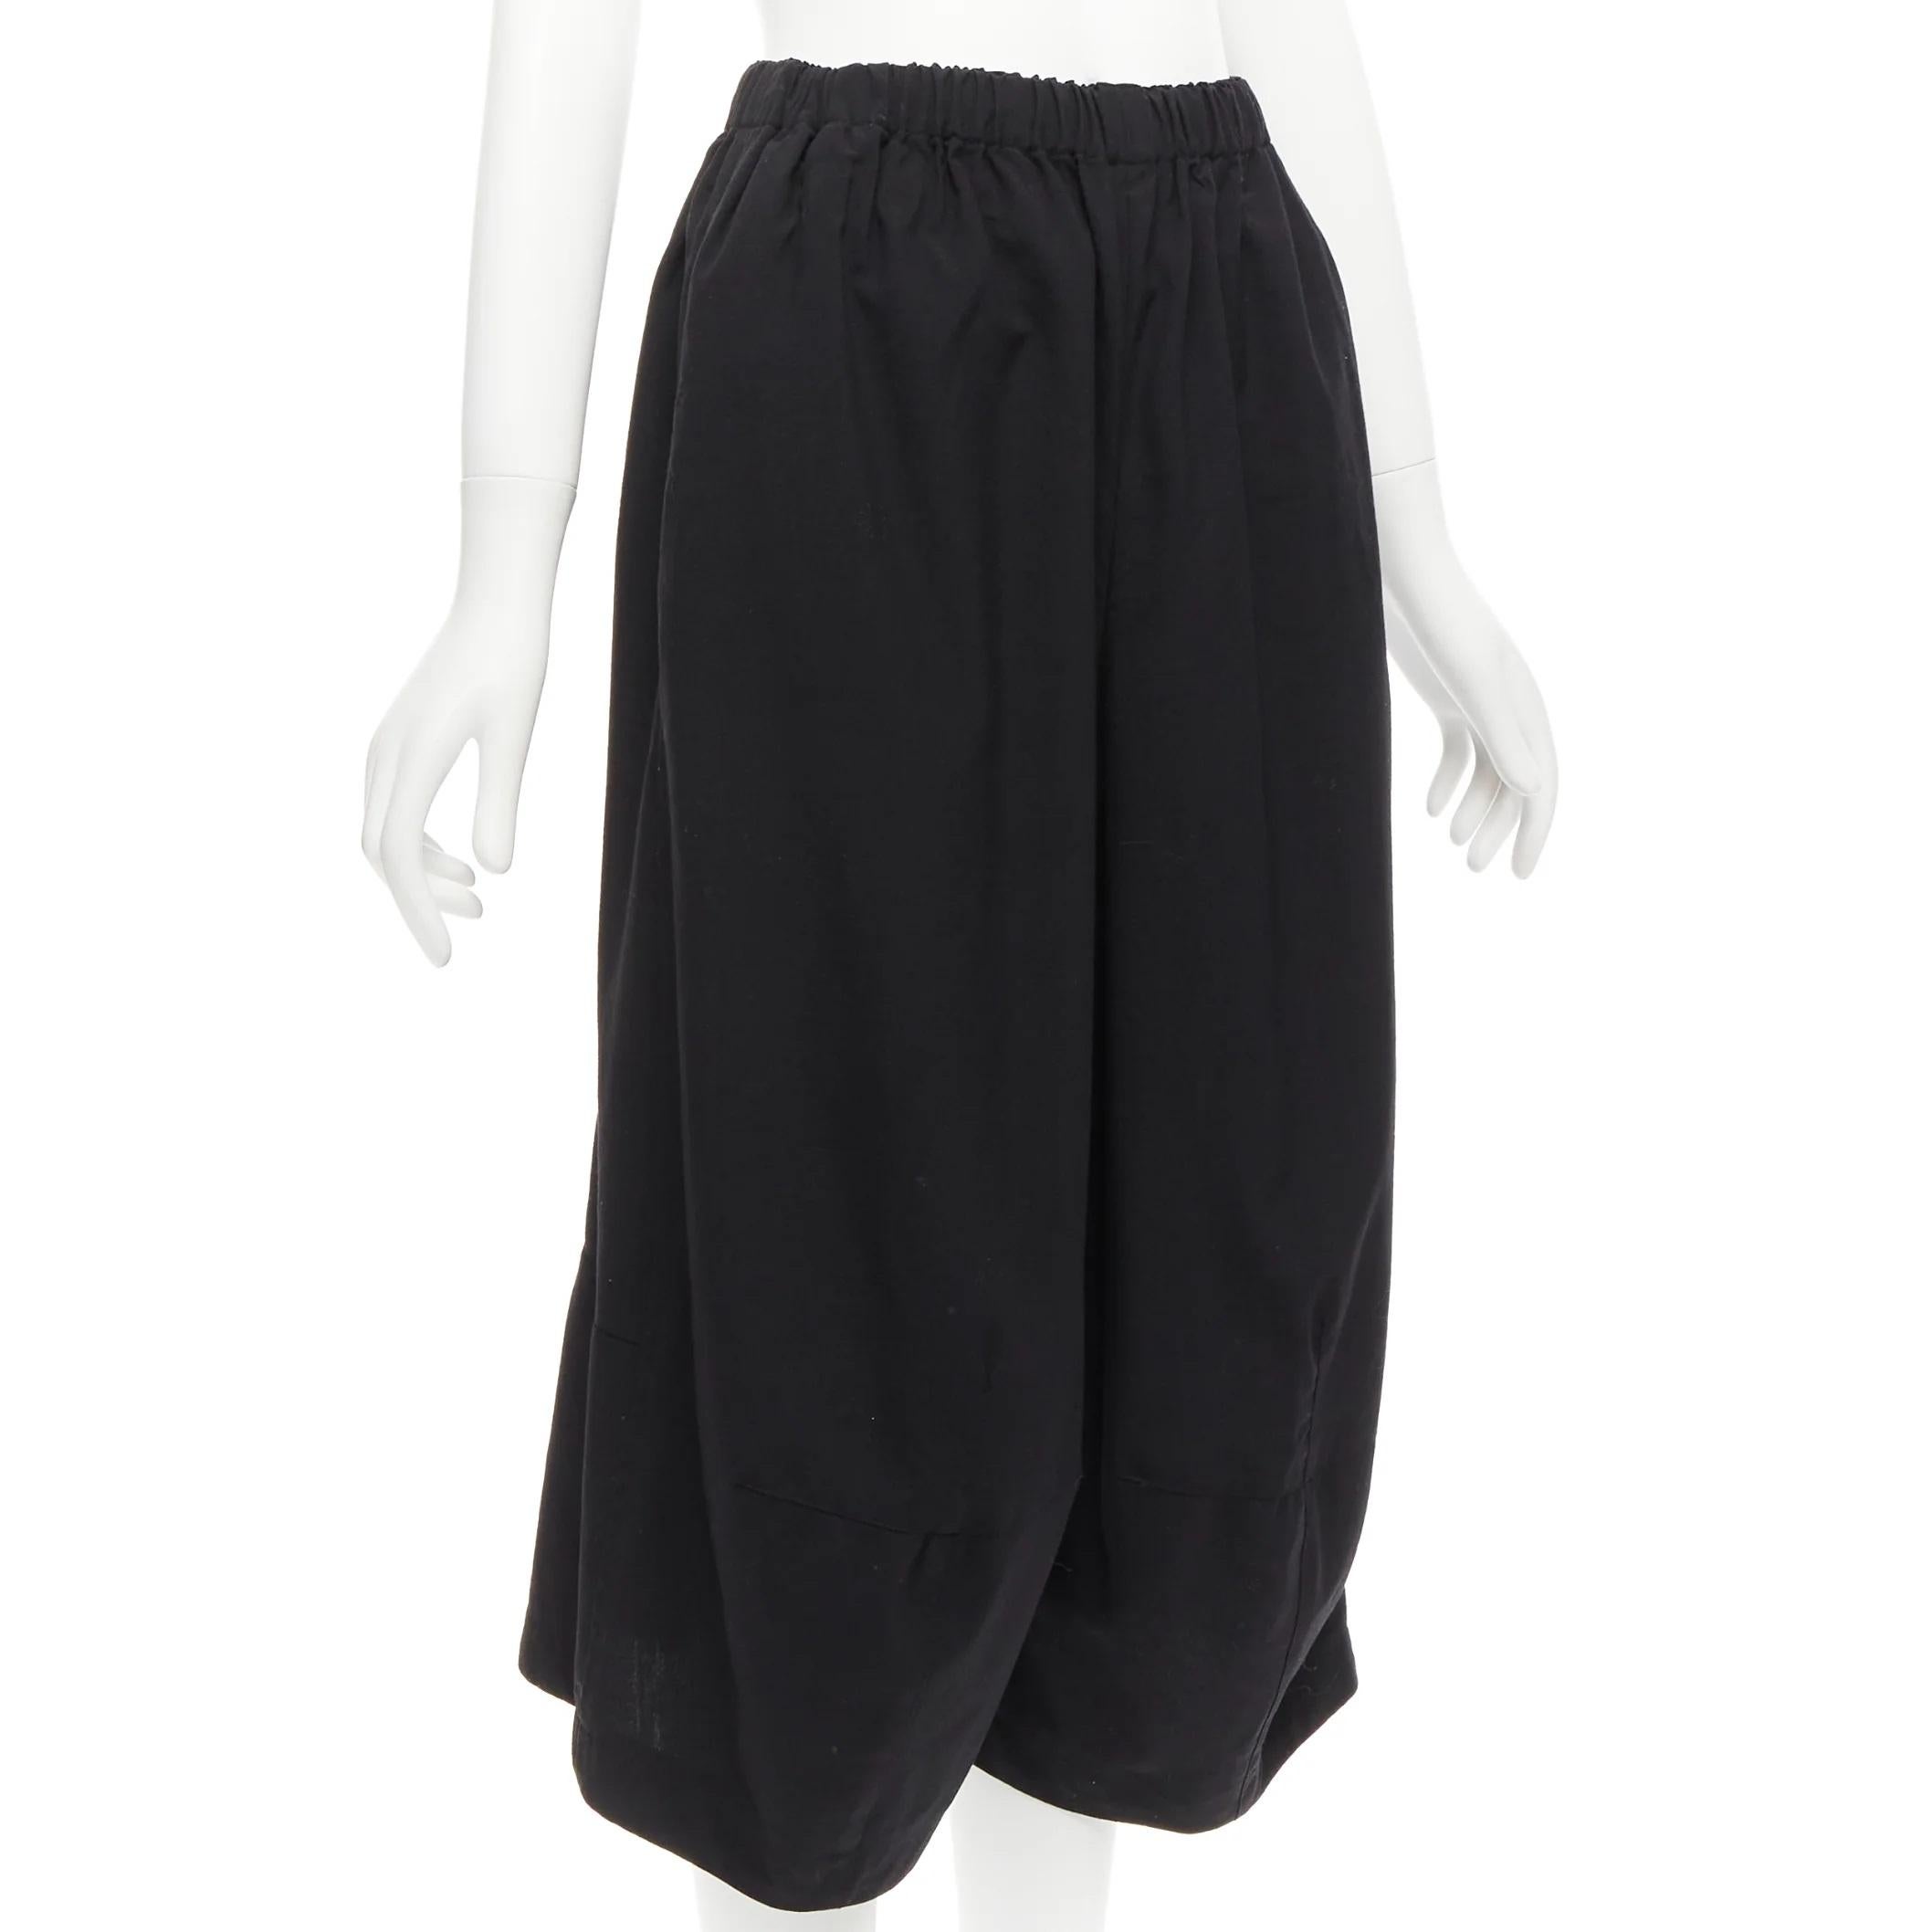 COMME DES GARCONS 2016 CDG black wool panelled wide culotte pants S
Reference: JACG/A00107
Brand: Comme Des Garcons
Collection: CDG
Material: Wool
Color: Black
Pattern: Solid
Closure: Elasticated
Made in: Japan

CONDITION:
Condition: Excellent, this